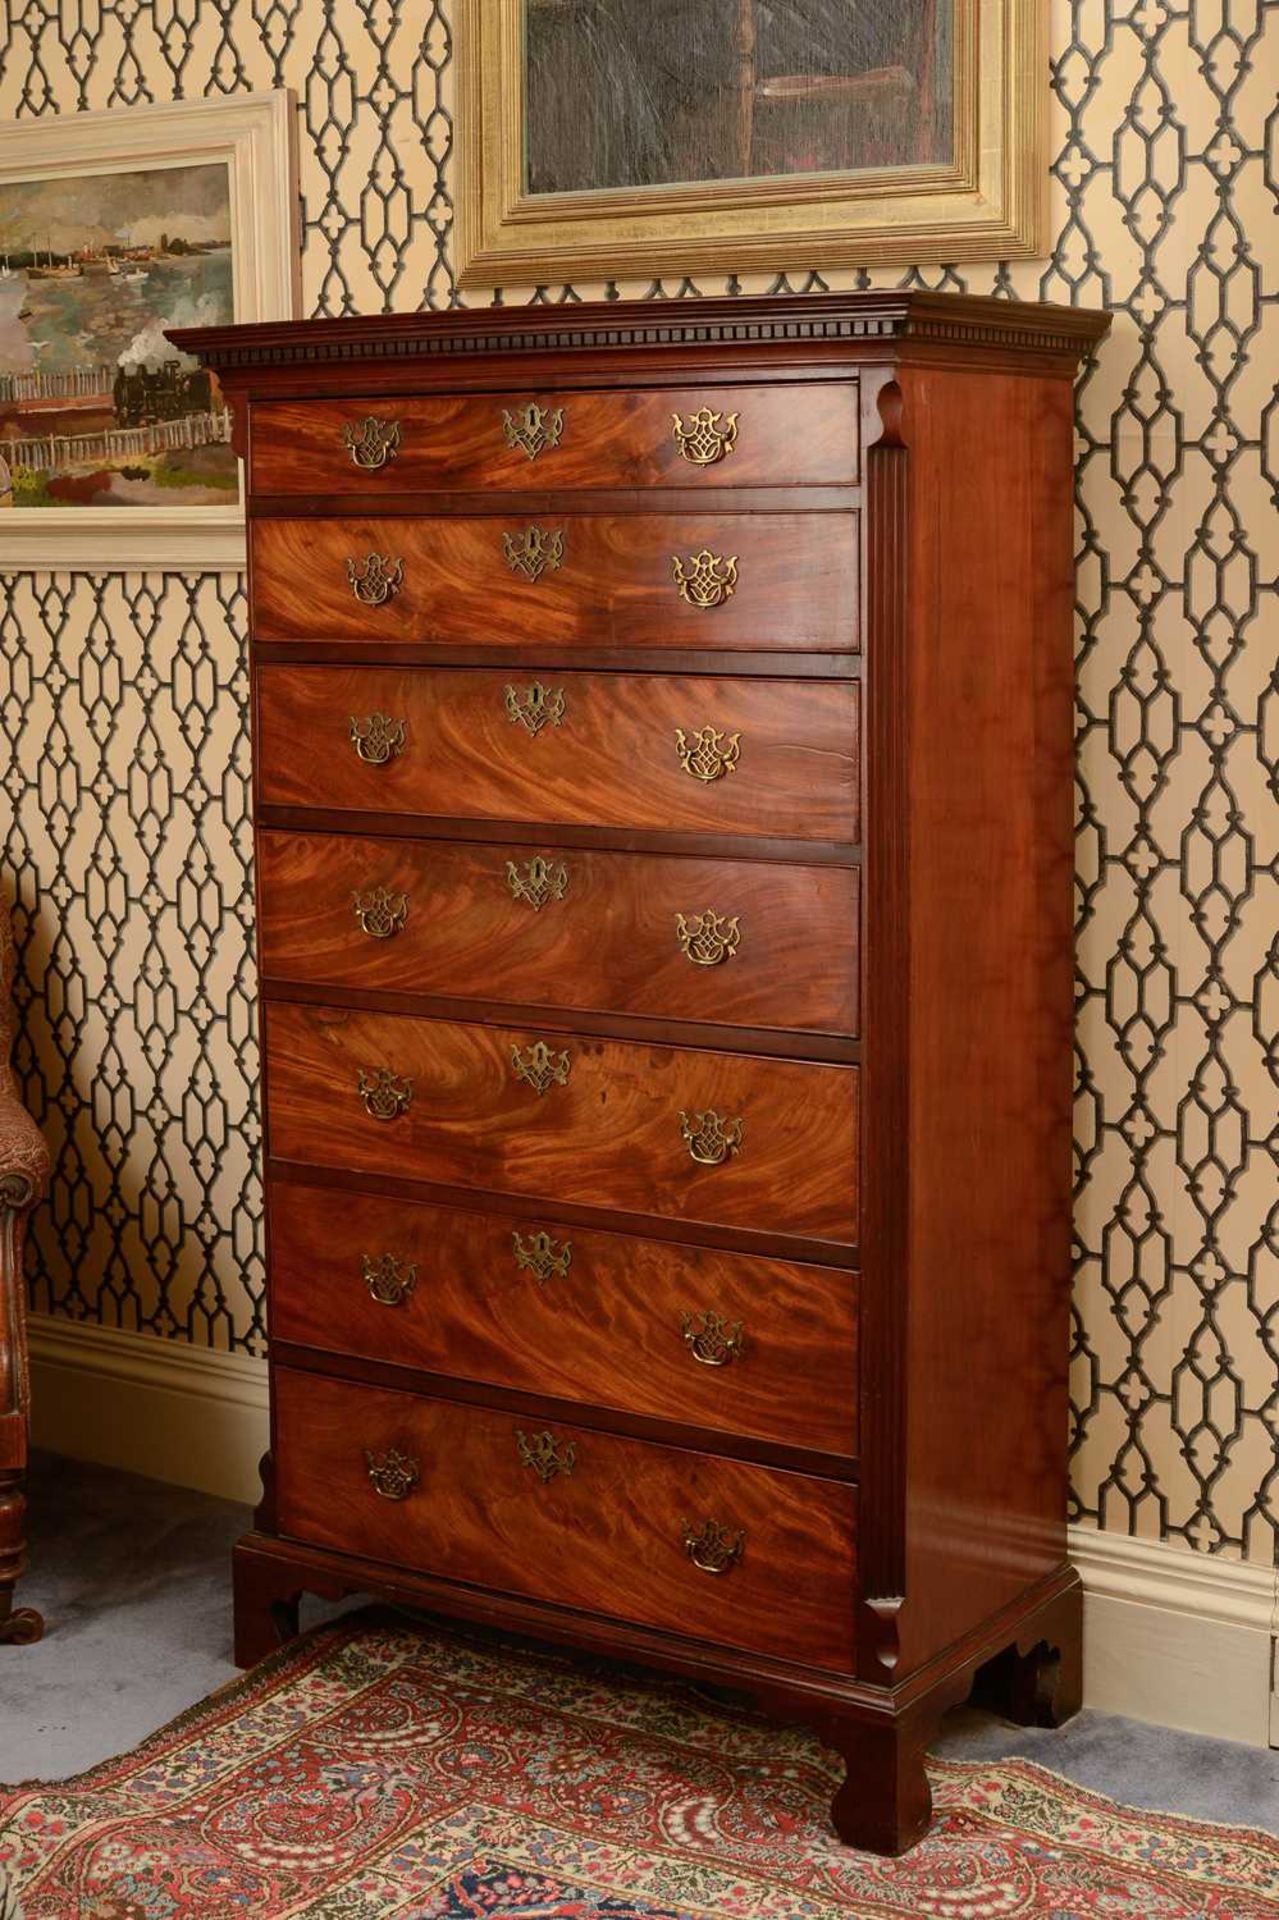 A mahogany chest of drawers,